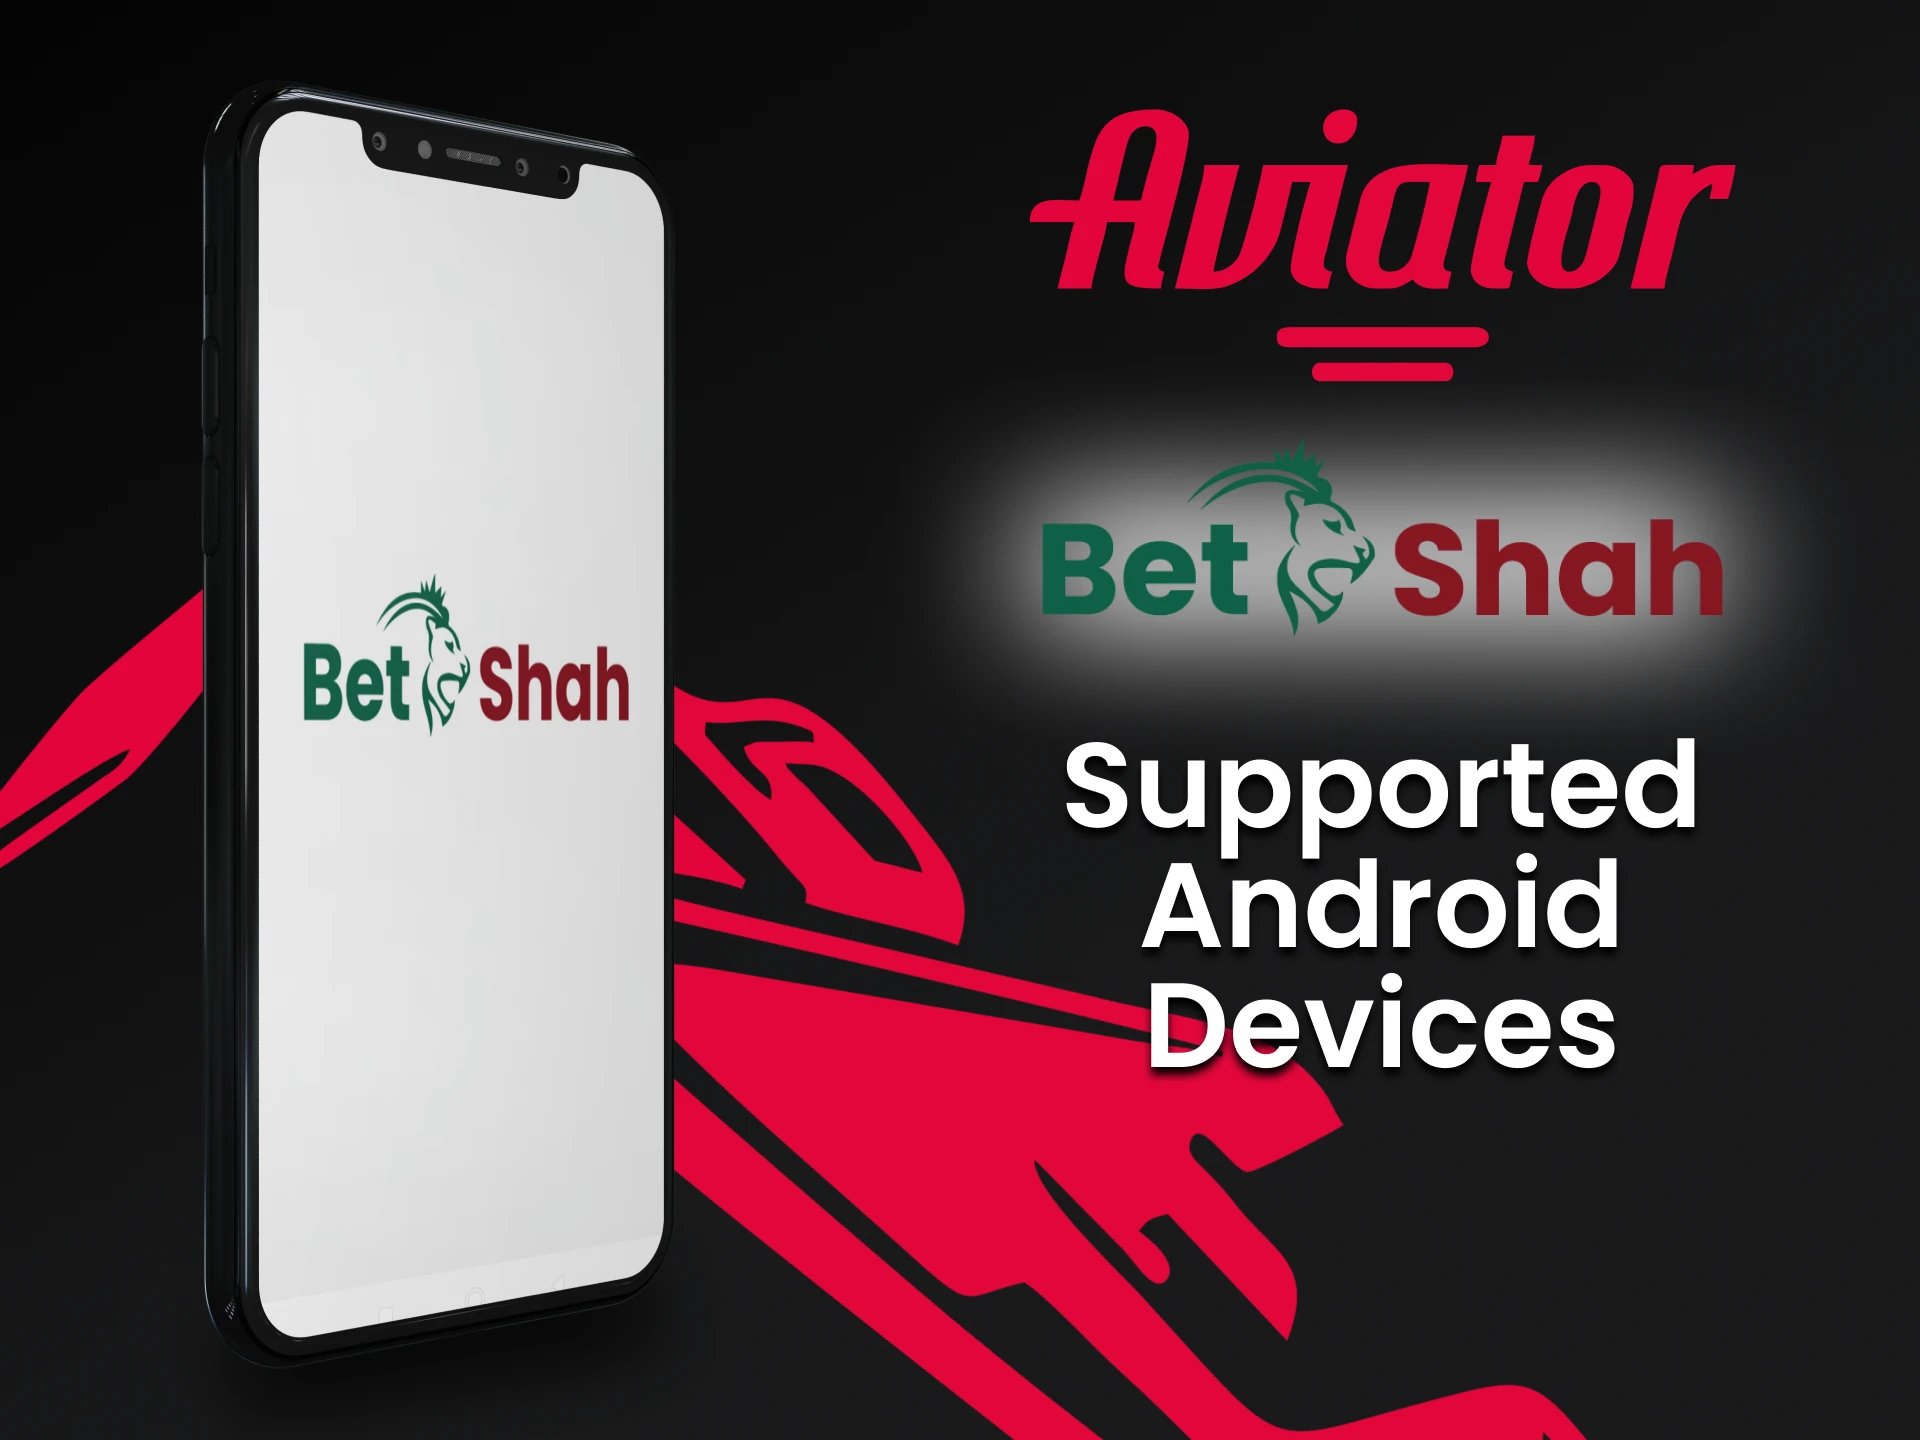 Use the BetShah app on Android devices to play Aviator.